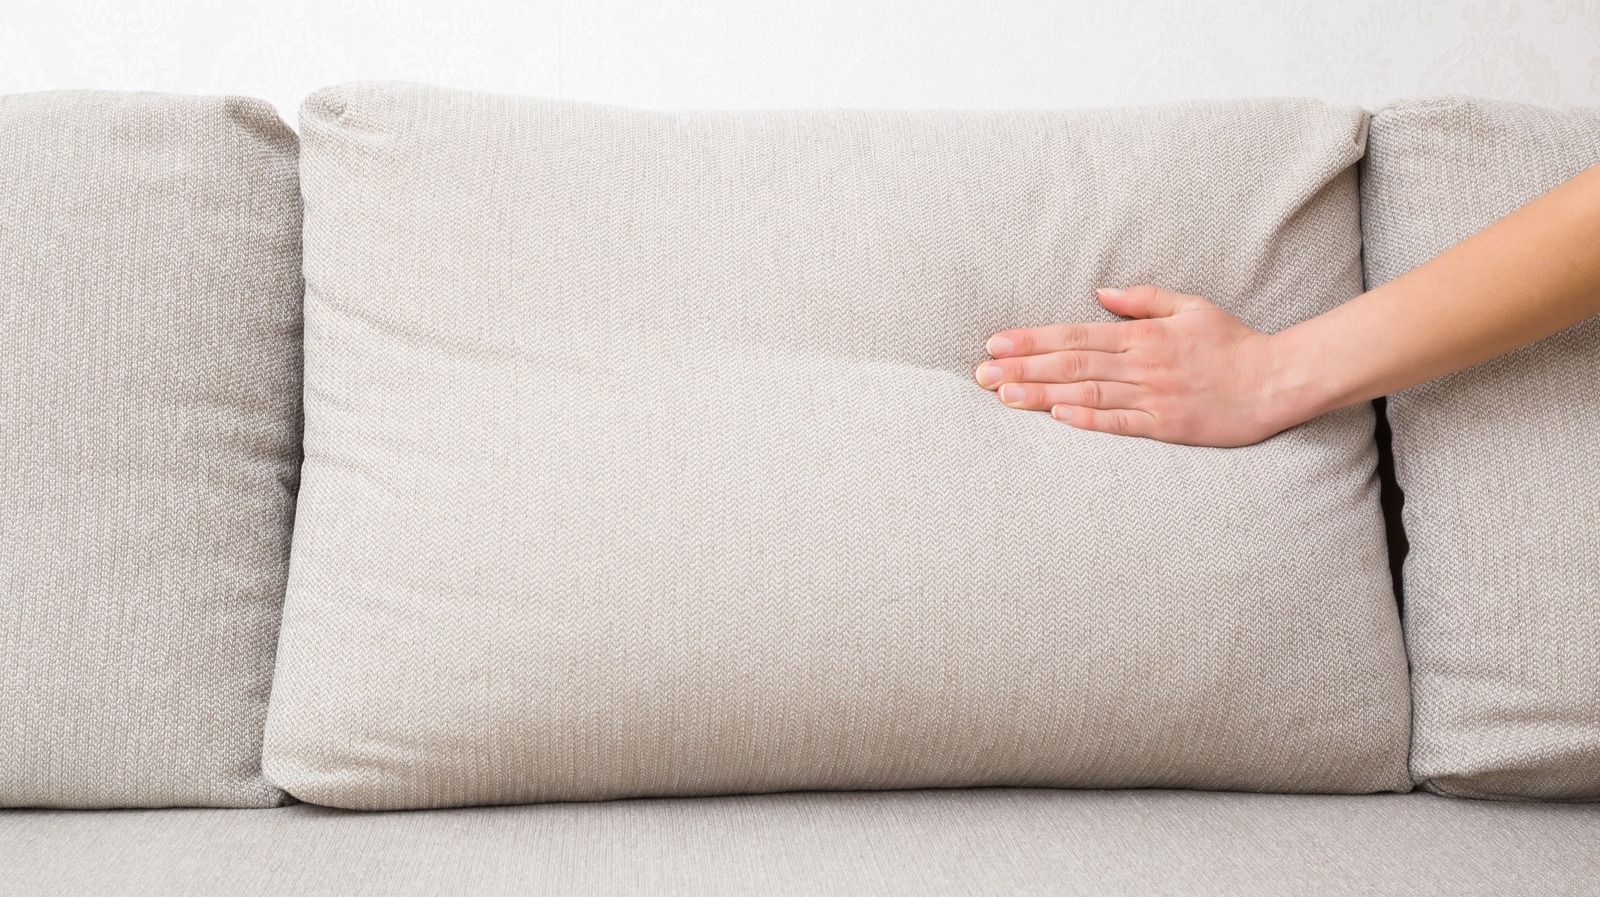 https://www.housedigest.com/img/gallery/how-to-wash-your-couch-cushion-covers/l-intro-1682957490.jpg